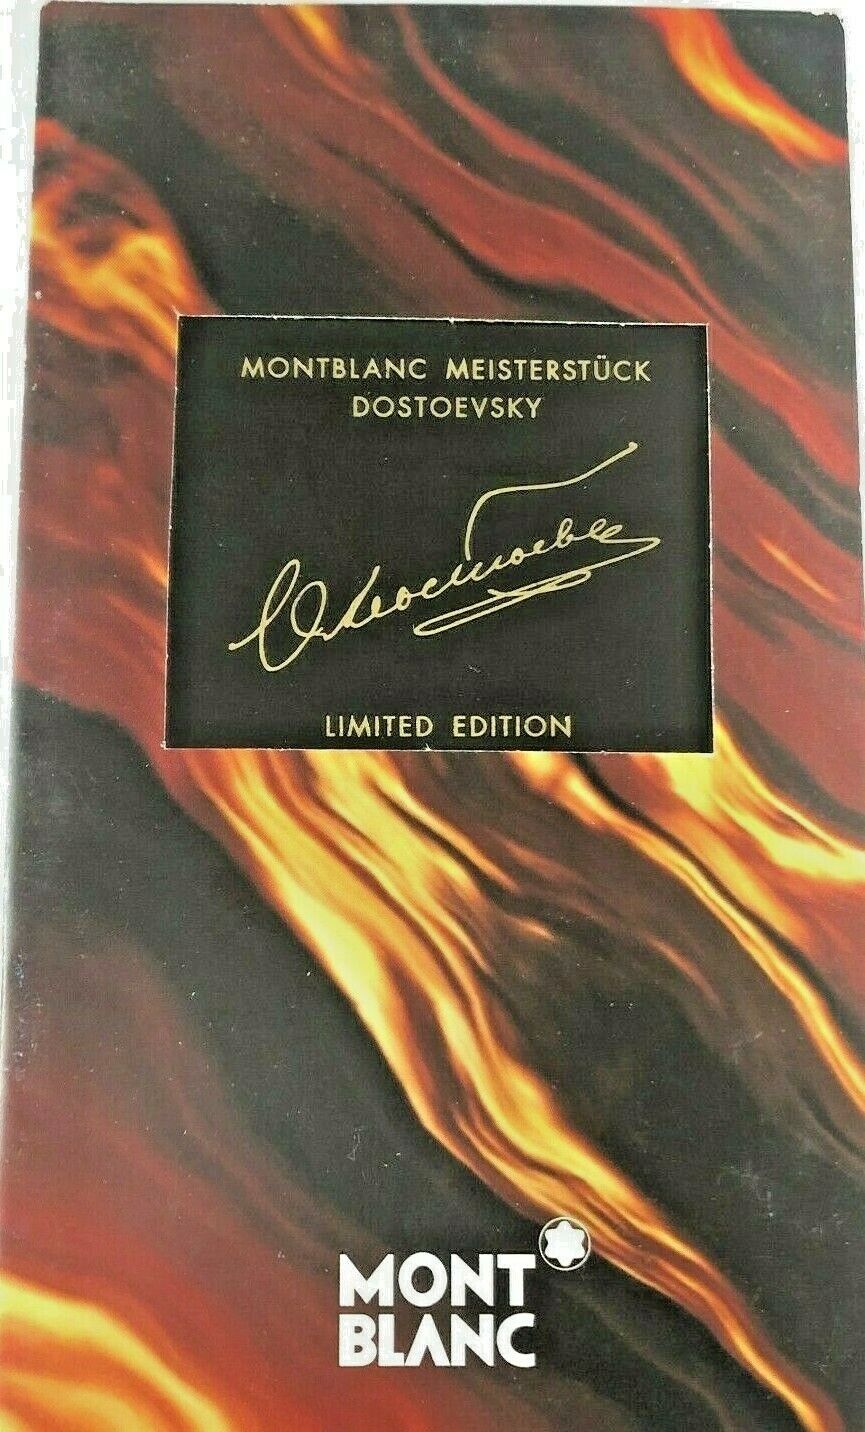  Montblanc 1997 DOSTOEVSKY Writers Series International Limited Edition Brochure